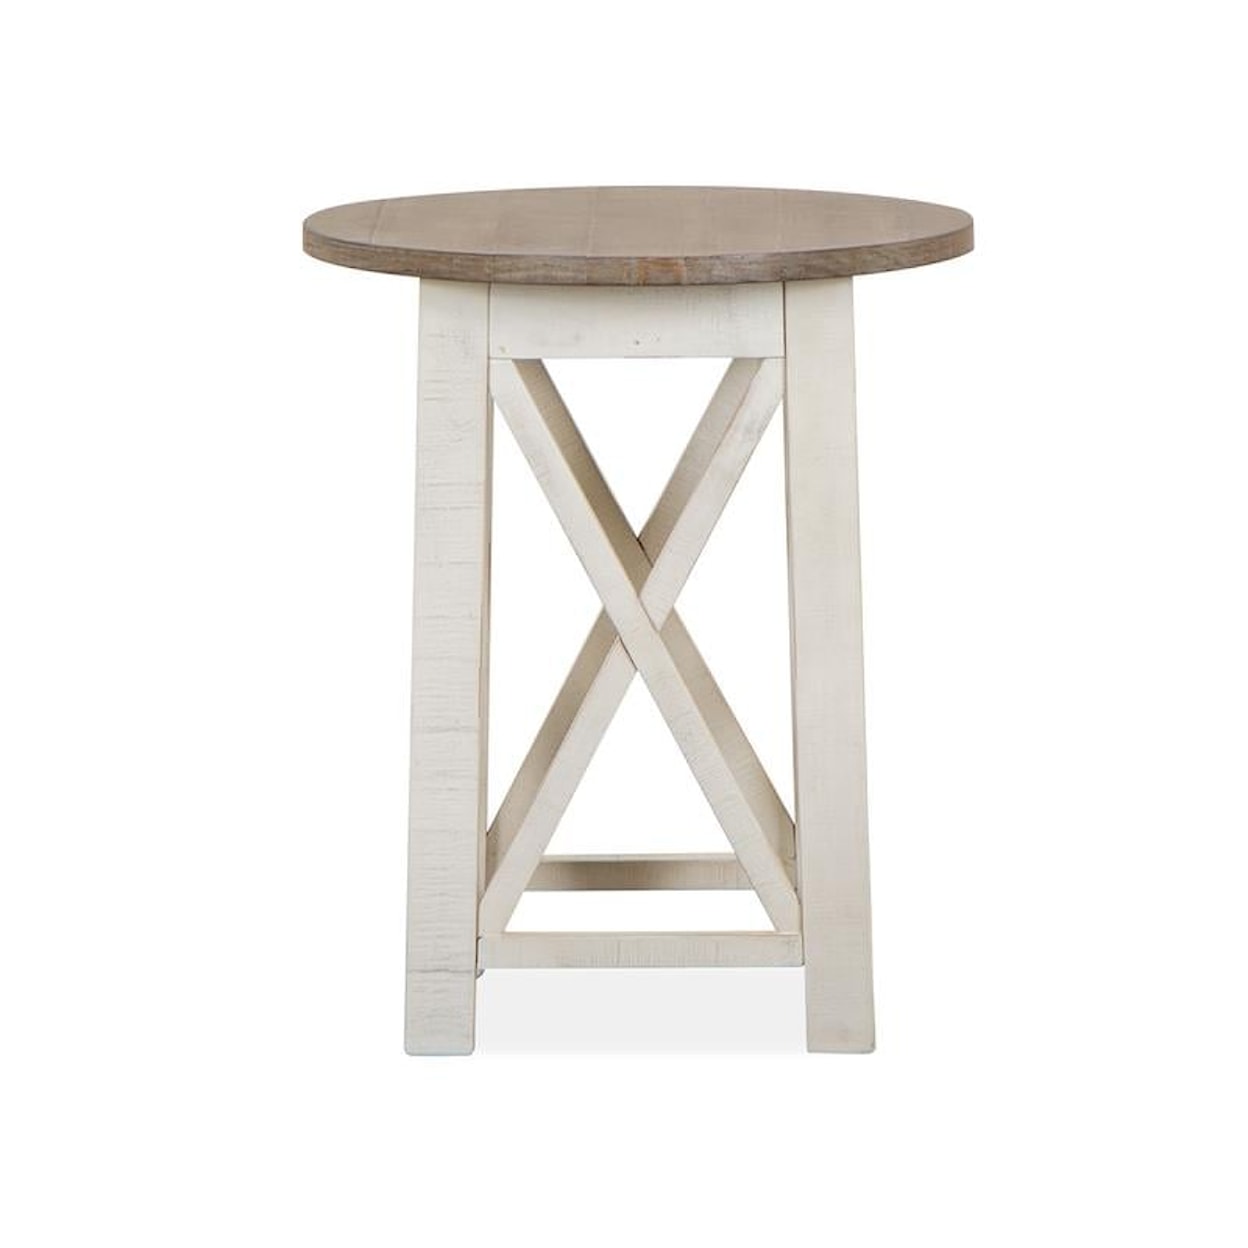 Magnussen Home Sedley Occasional Tables Round End Table